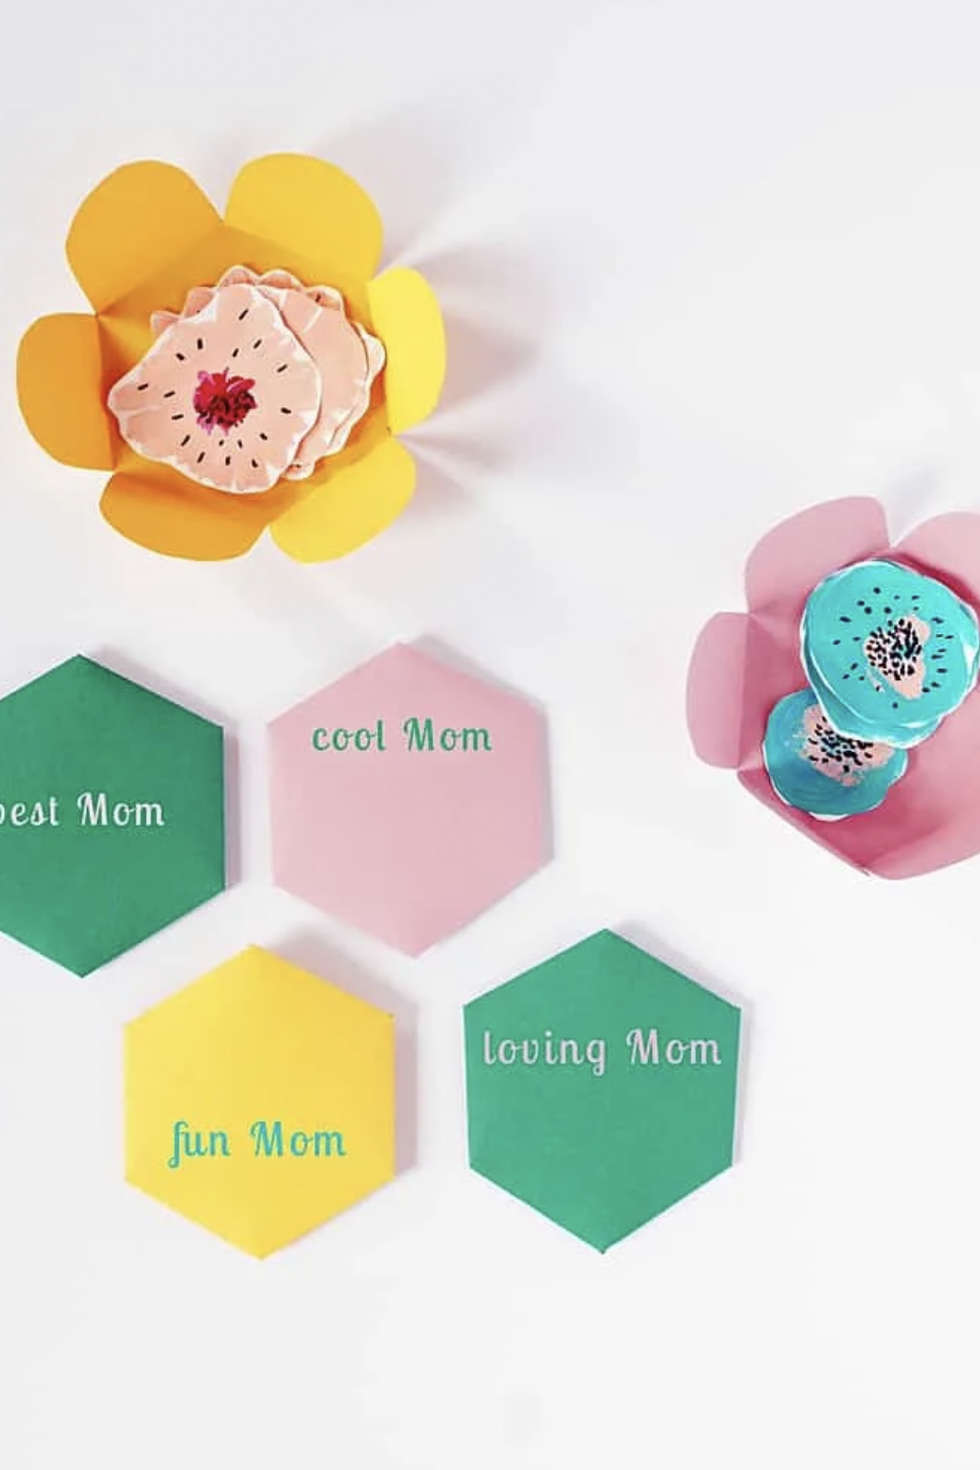 9 DIY Mother's Day Gift Ideas  Mother's Day Crafts 